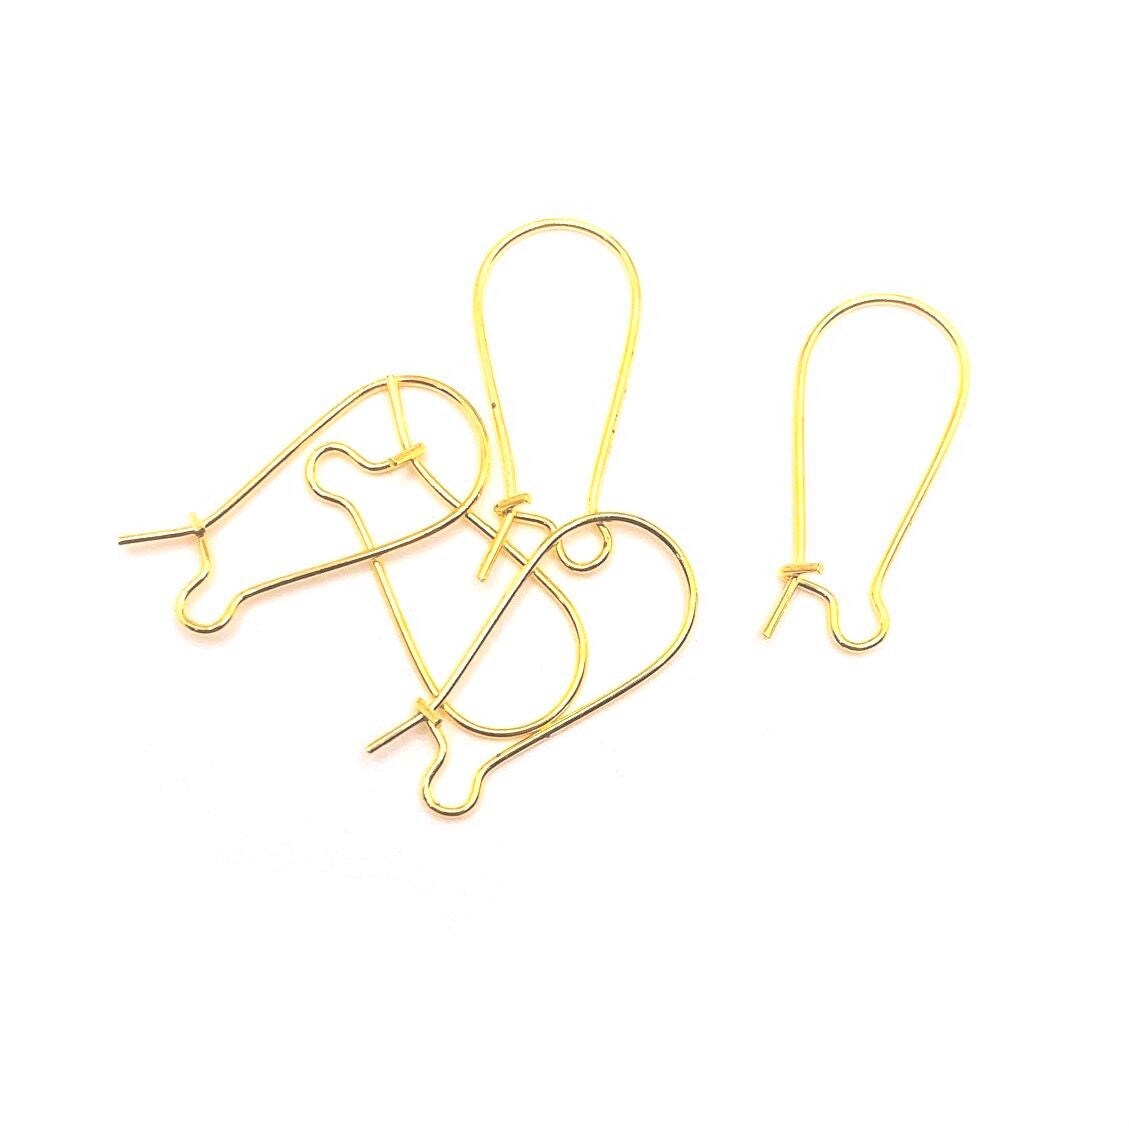 100 or 500 Pieces: Gold Plated Kidney Earring Wires